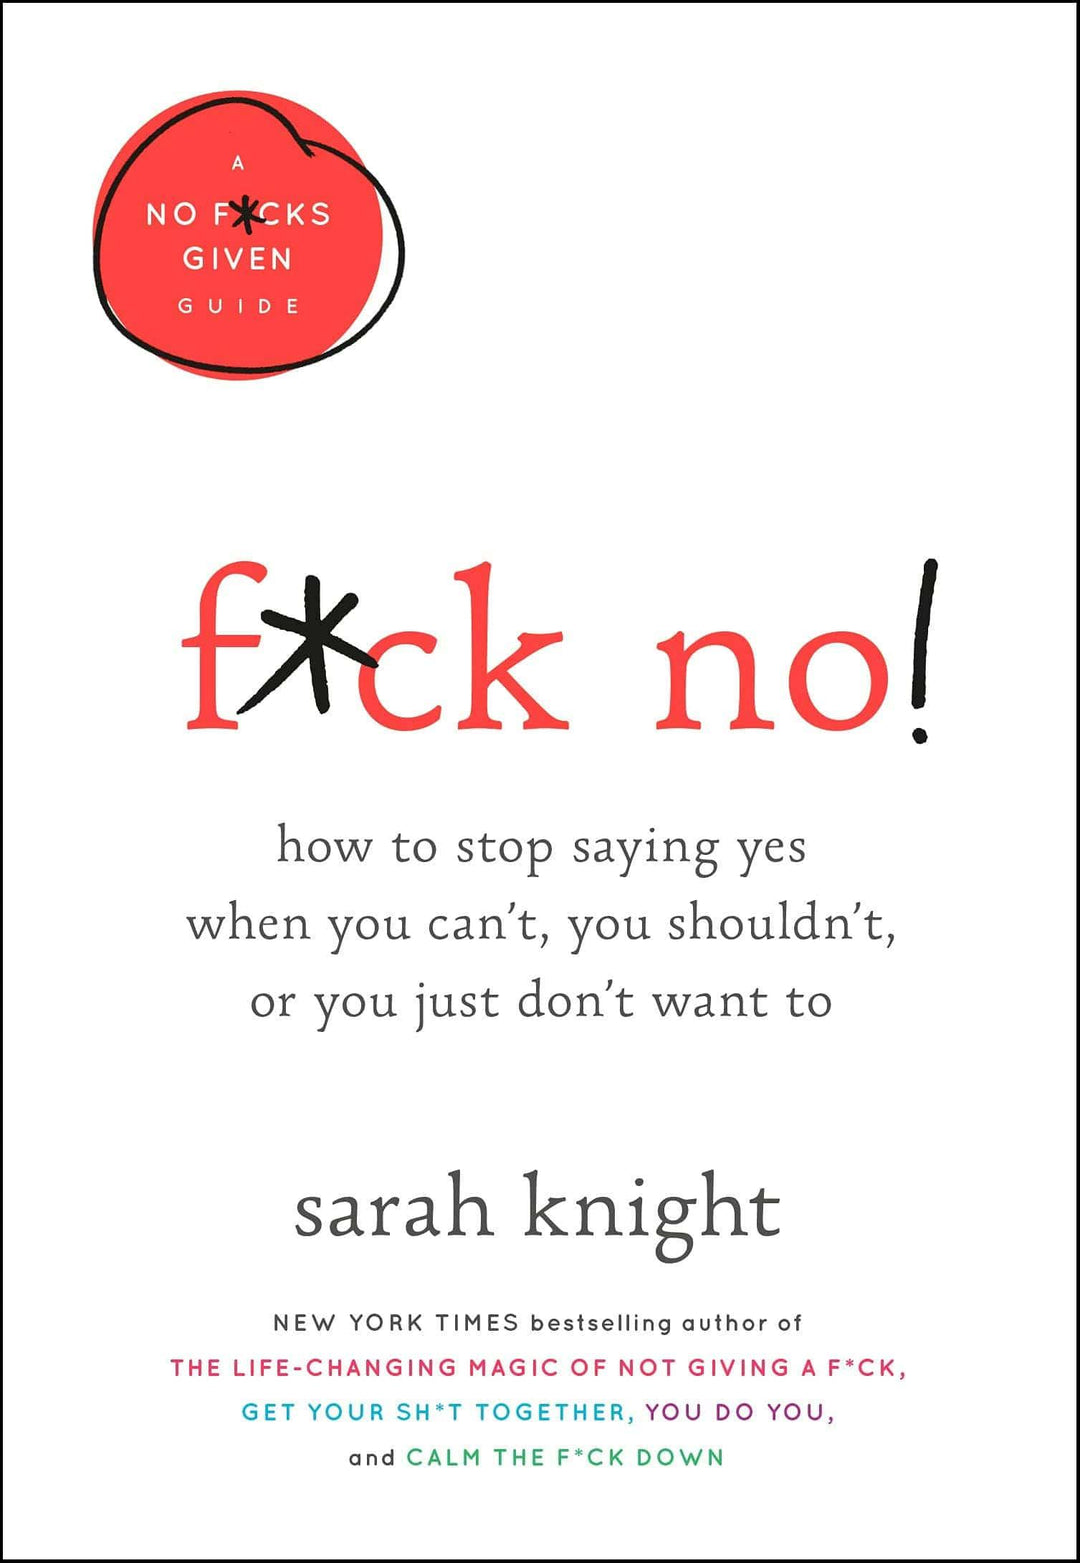 F*ck No!: How to Stop Saying Yes When You Can't - Esme and Elodie